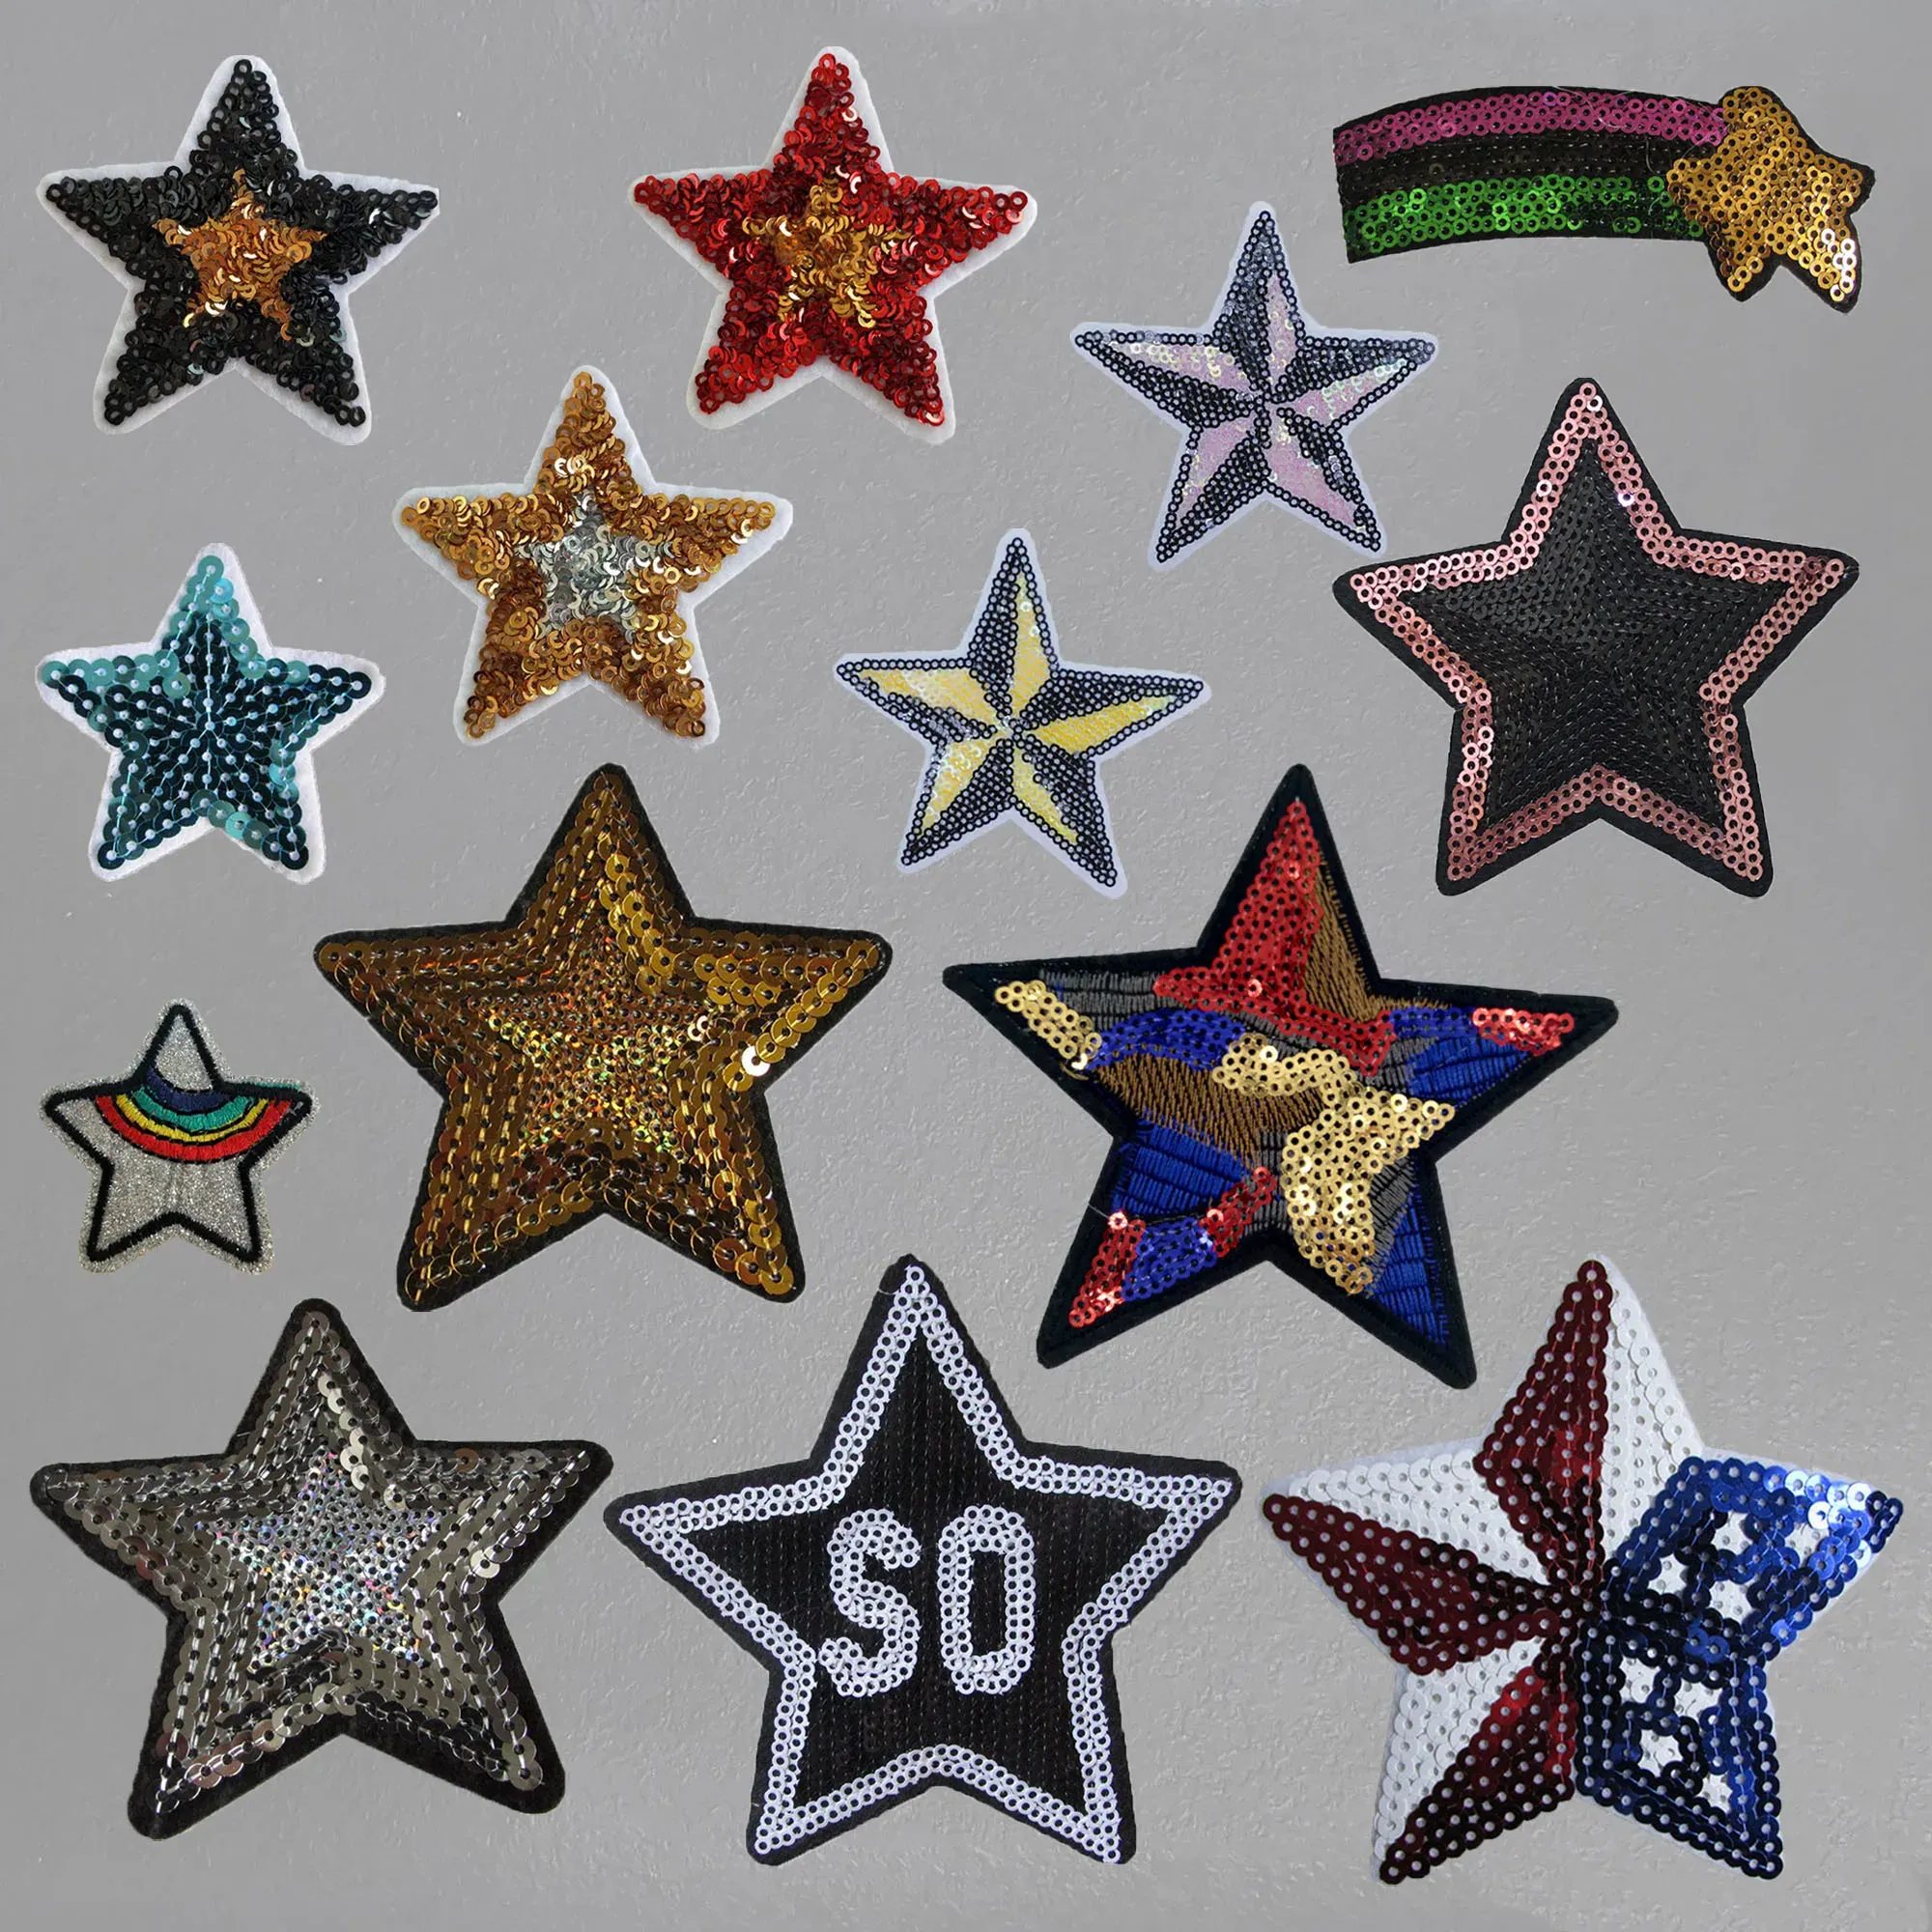 Star Pattern Sequin Embroidery DIY Wholesale Sales 1-10 pcs Hot Melt Adhesive Ironing Sewable Patch Sticks patches for clothing